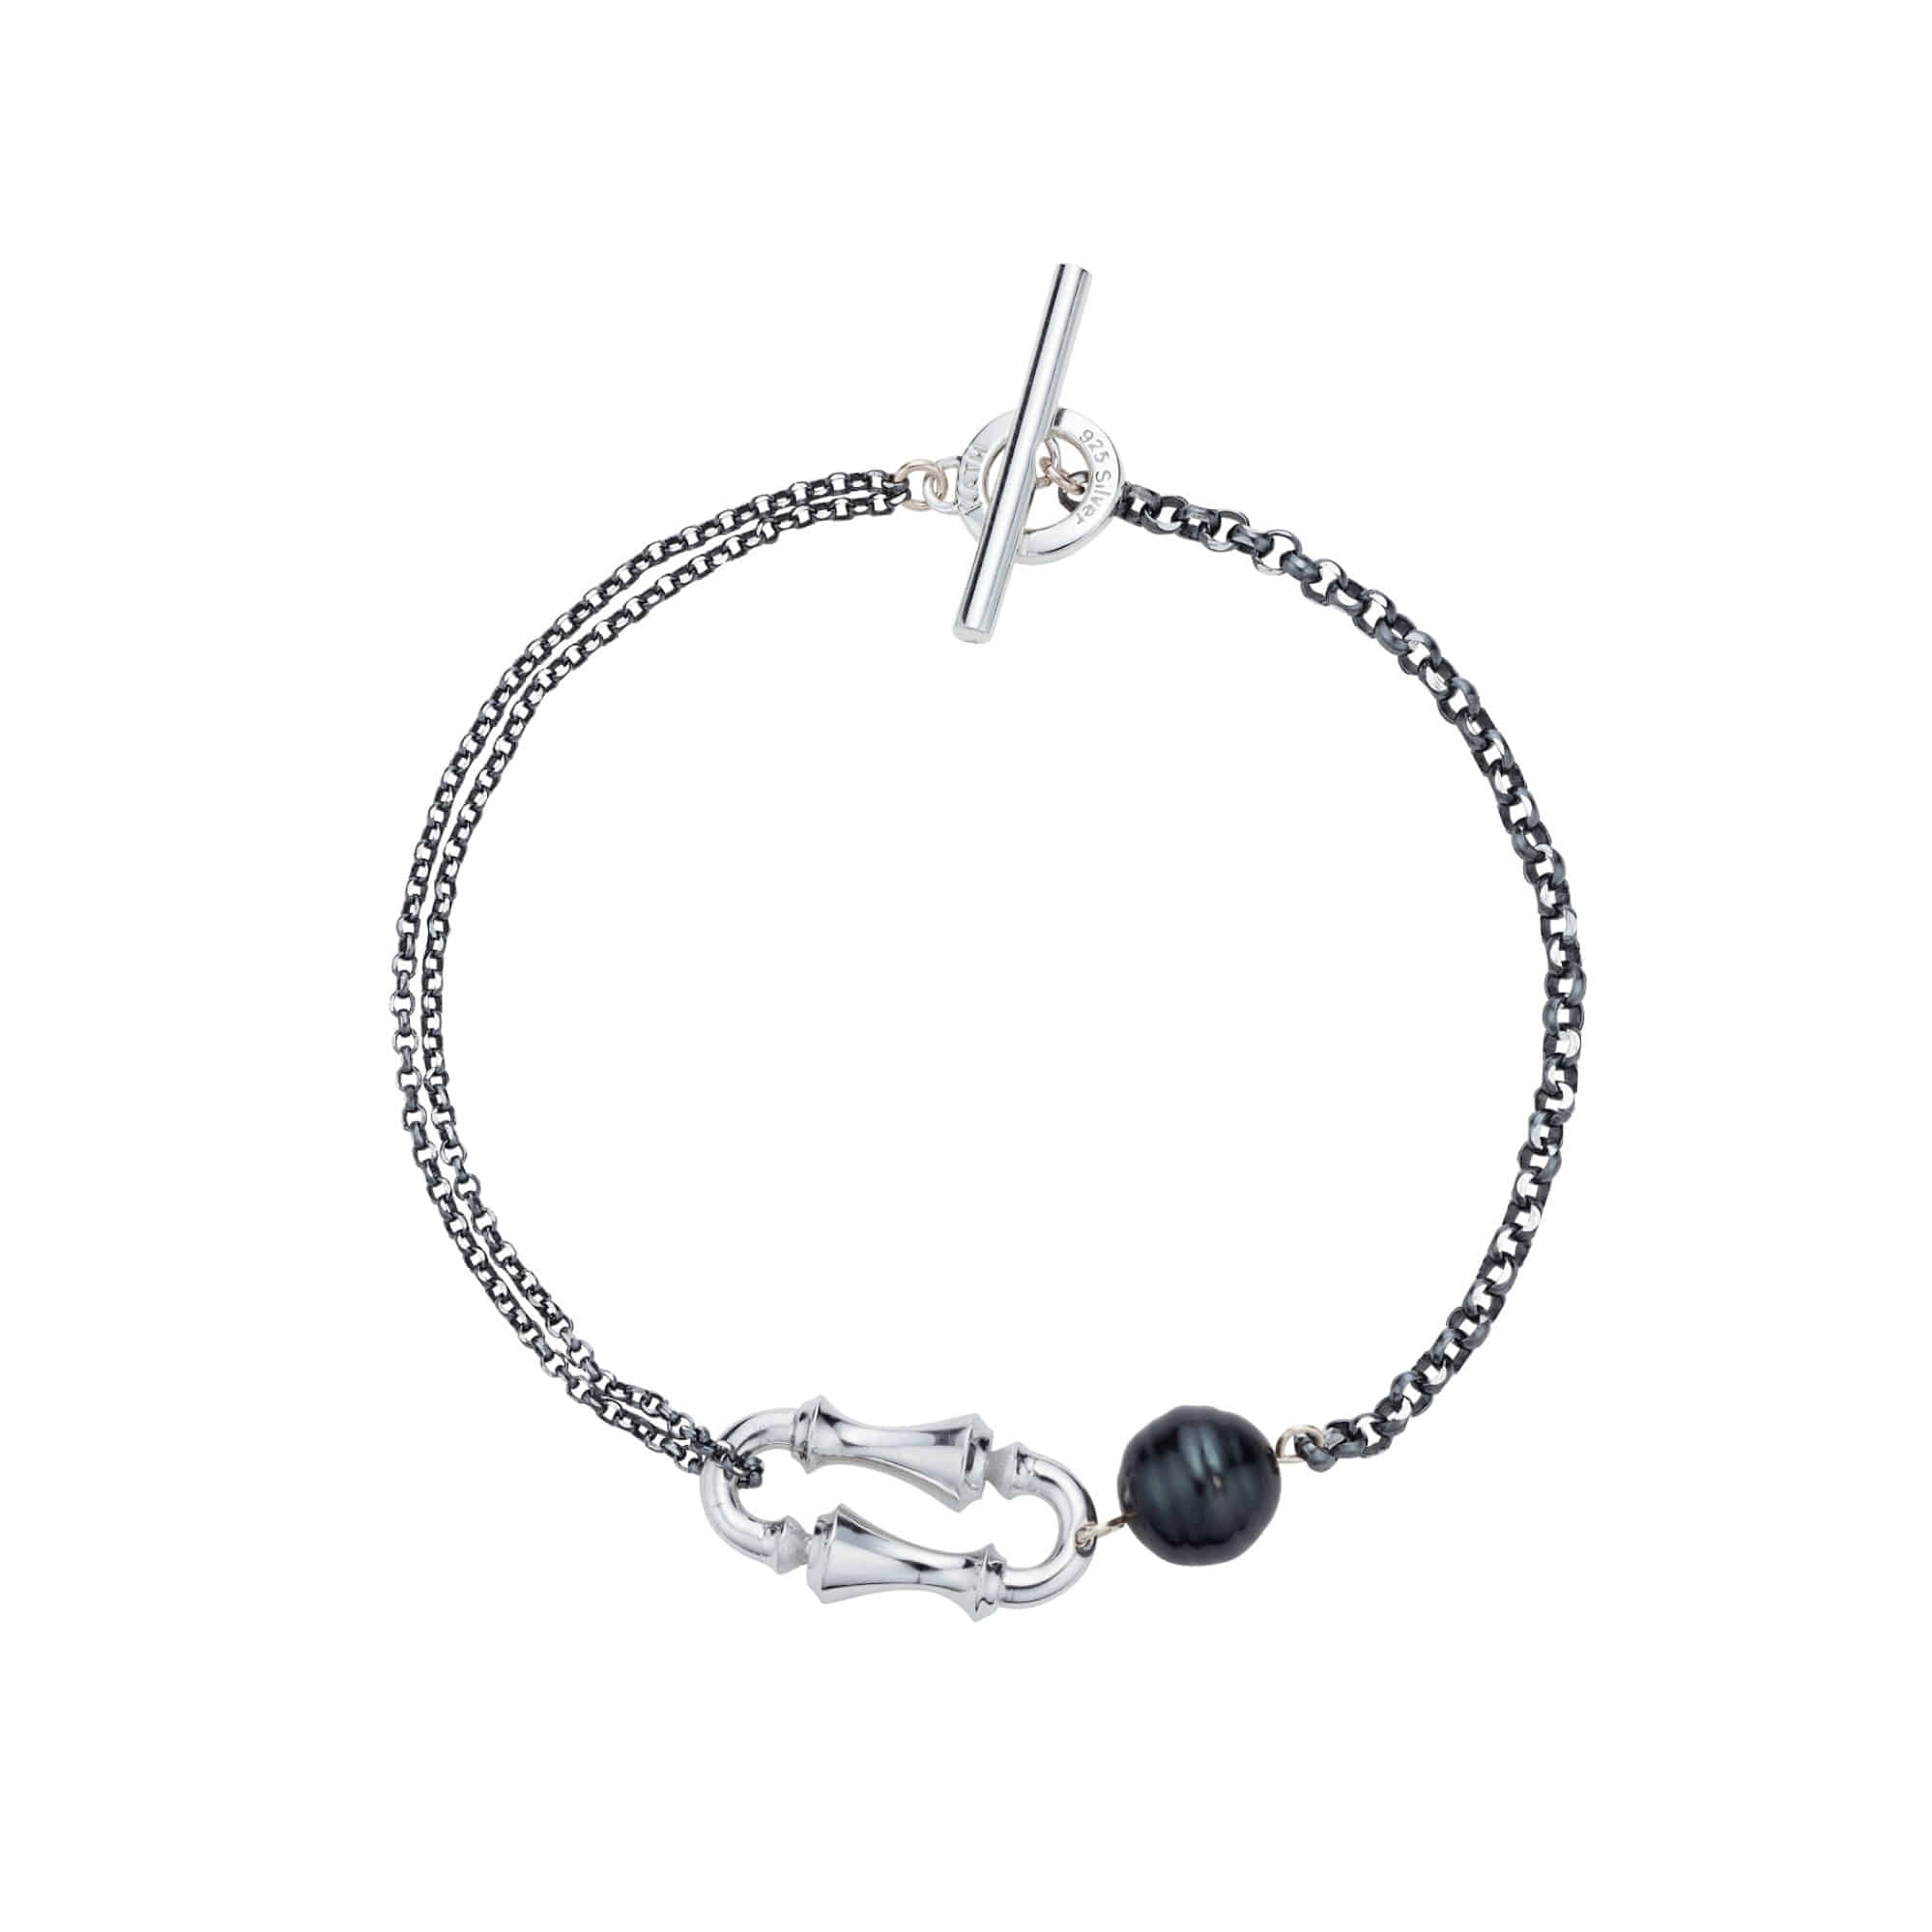 ARC T2 Bracelet in Sterling Silver with a Tahitian Pearl (Oxidized Silver Chain)